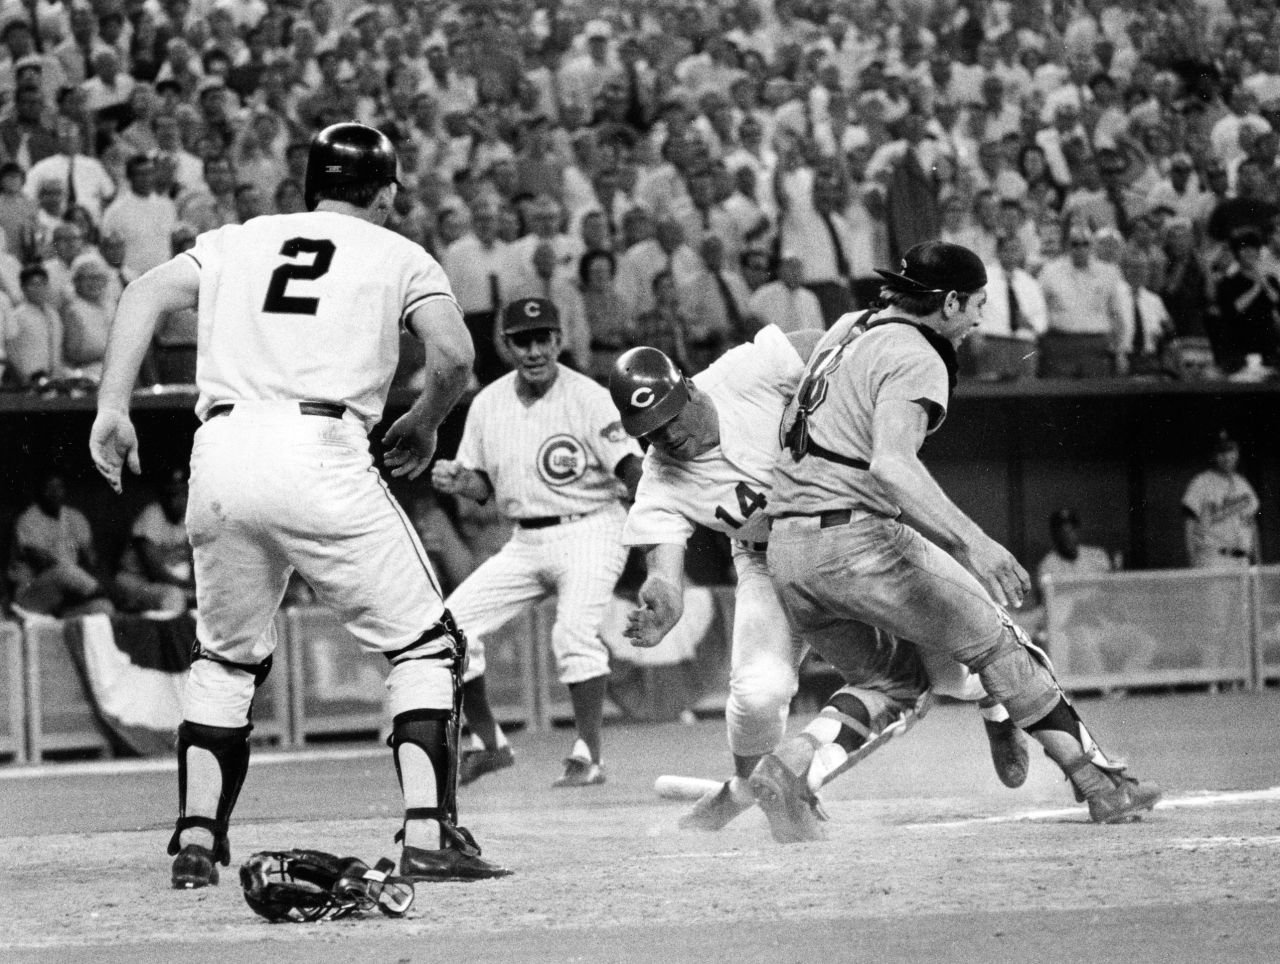 Cincinnati Reds' Pete Rose slams into Cleveland Indians' catcher Ray Fosse to score a controversial game-winning run for the National League team in the 12th inning of the 1970 All-Star game in Cincinnati. Fosse suffered a fractured shoulder in the collision.